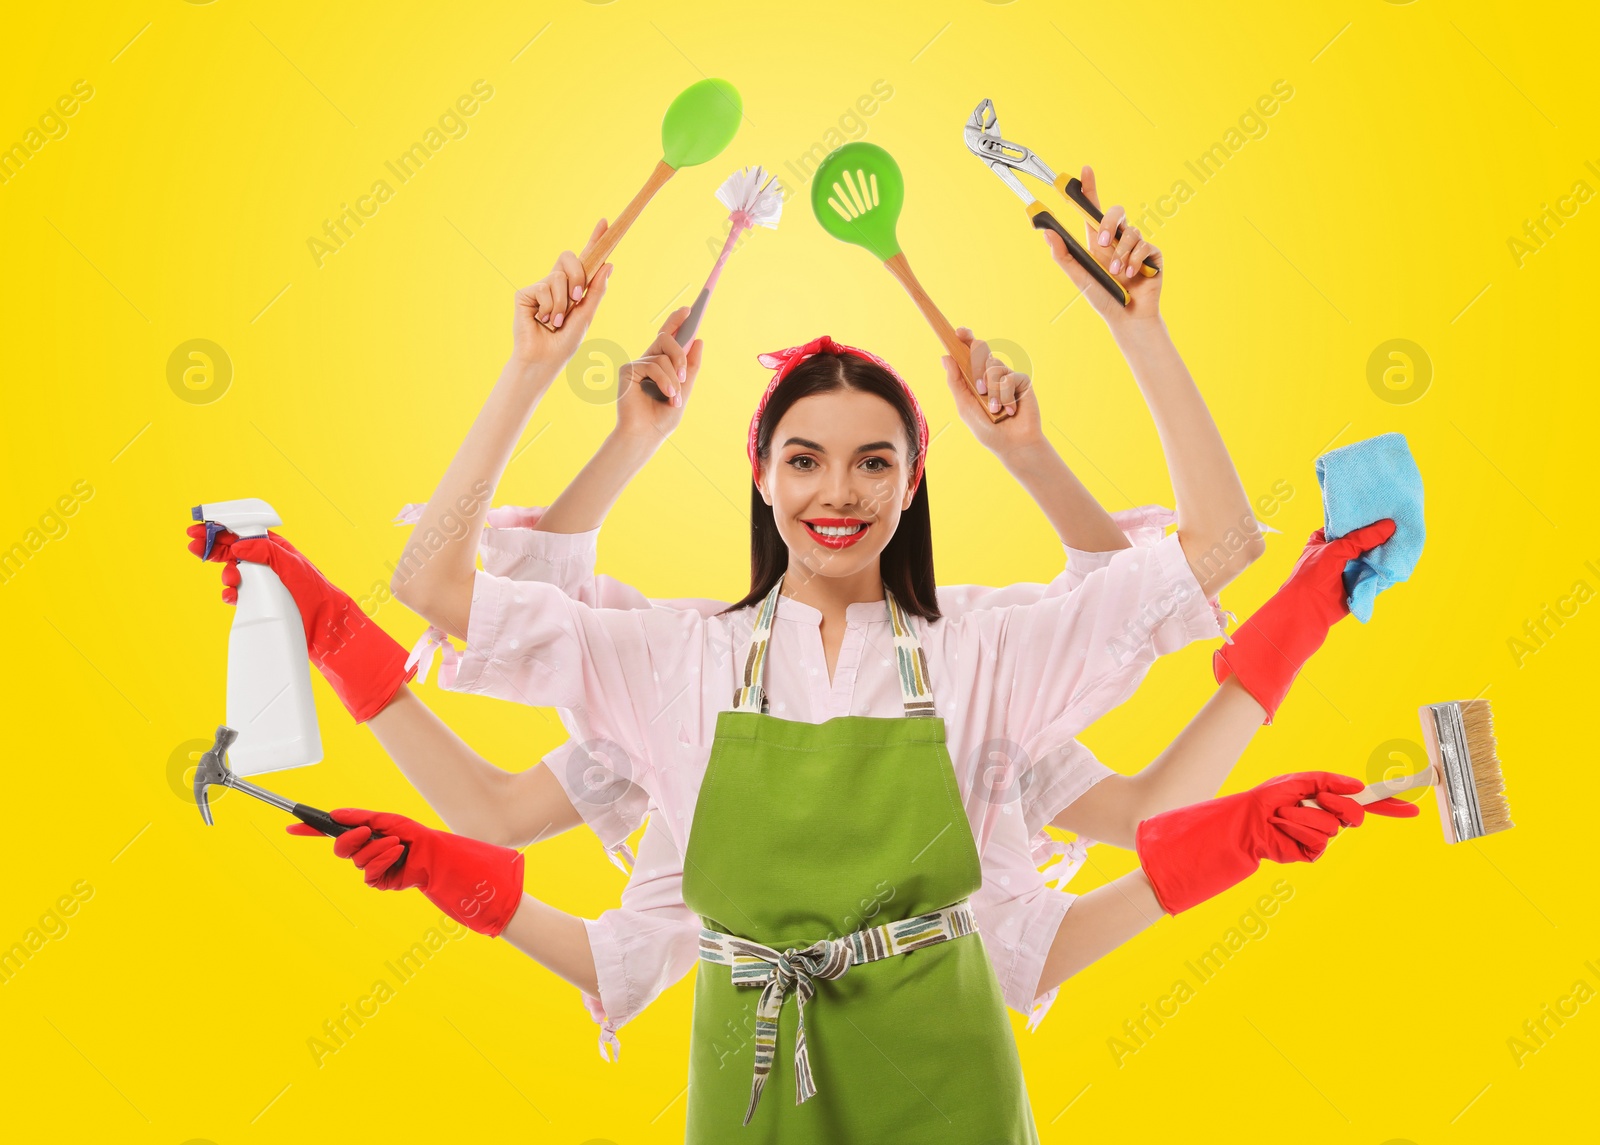 Image of Multitask housewife with many hands holding different stuff on yellow background